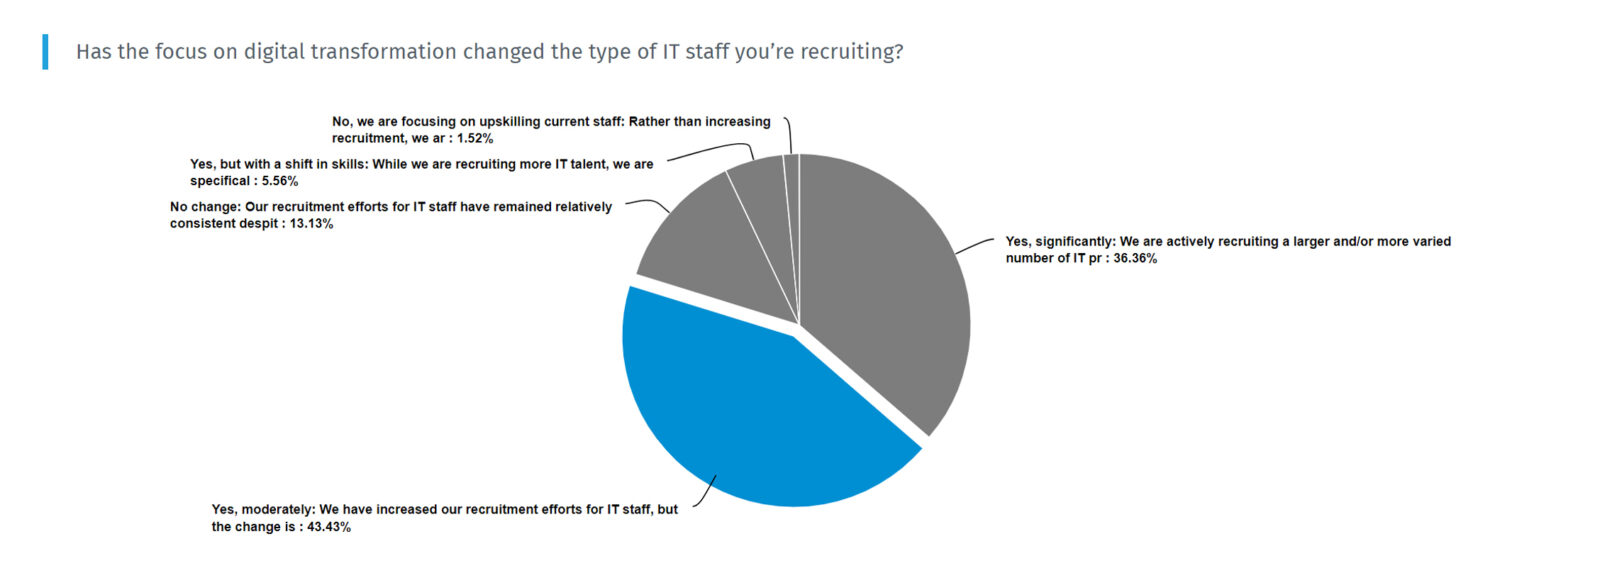 Has the focus on digital transformation changed the type of IT staff you're recruiting?